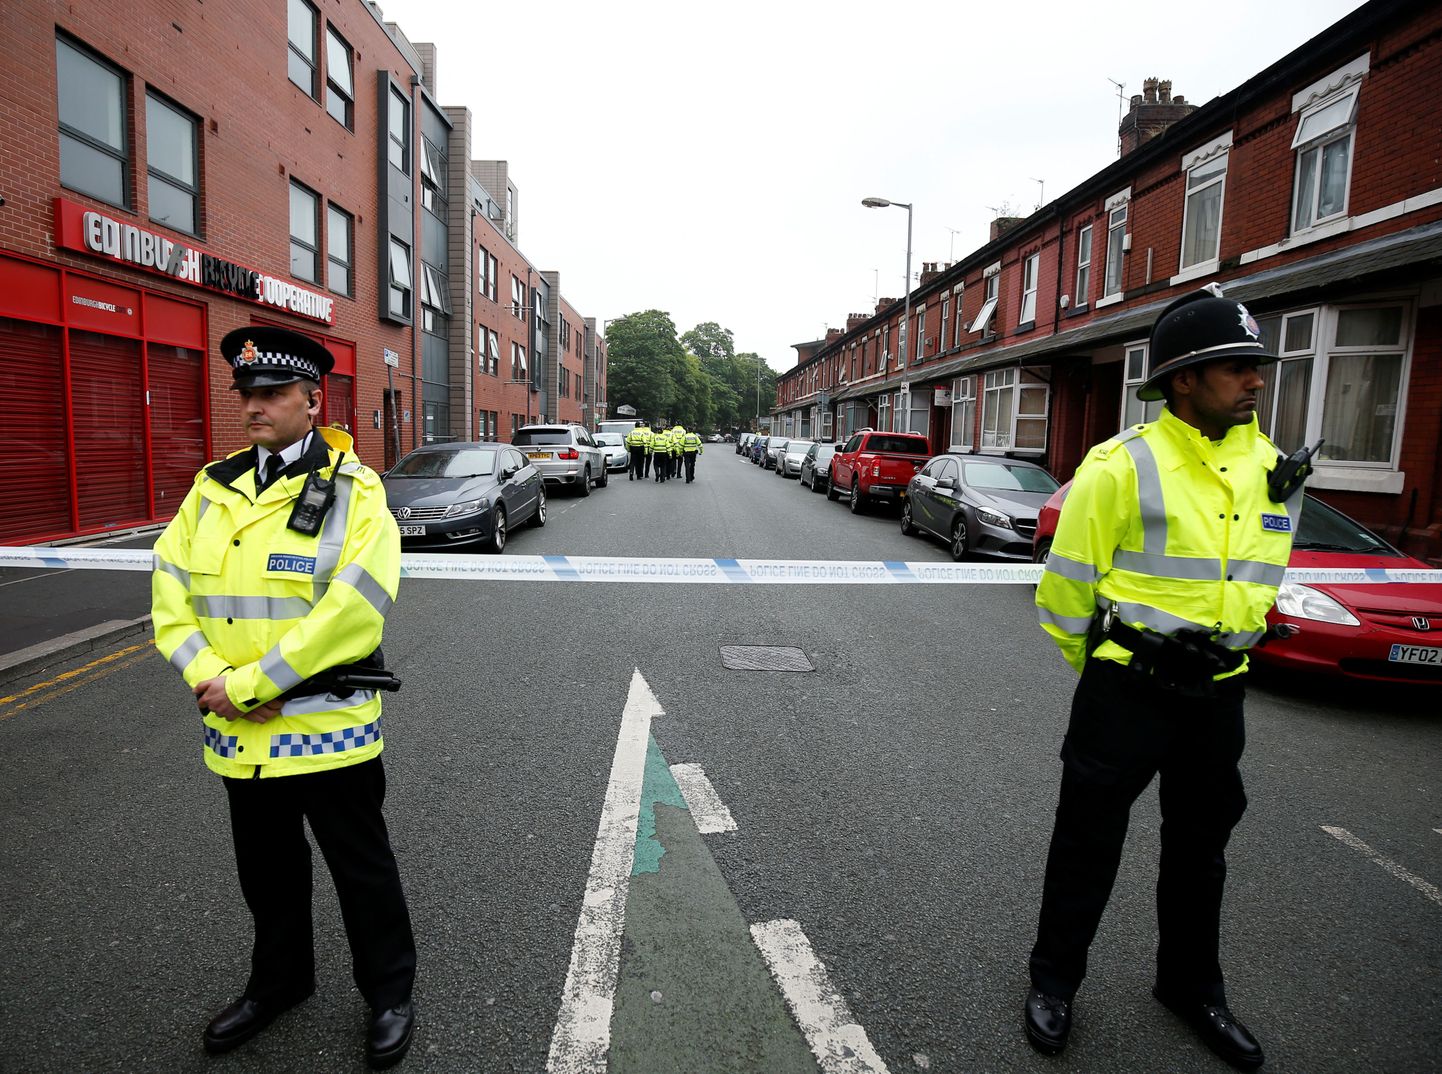 Police stand in front of a cordon in Rusholme, Manchester, Britain June 2, 2017. REUTERS/Andrew Yates